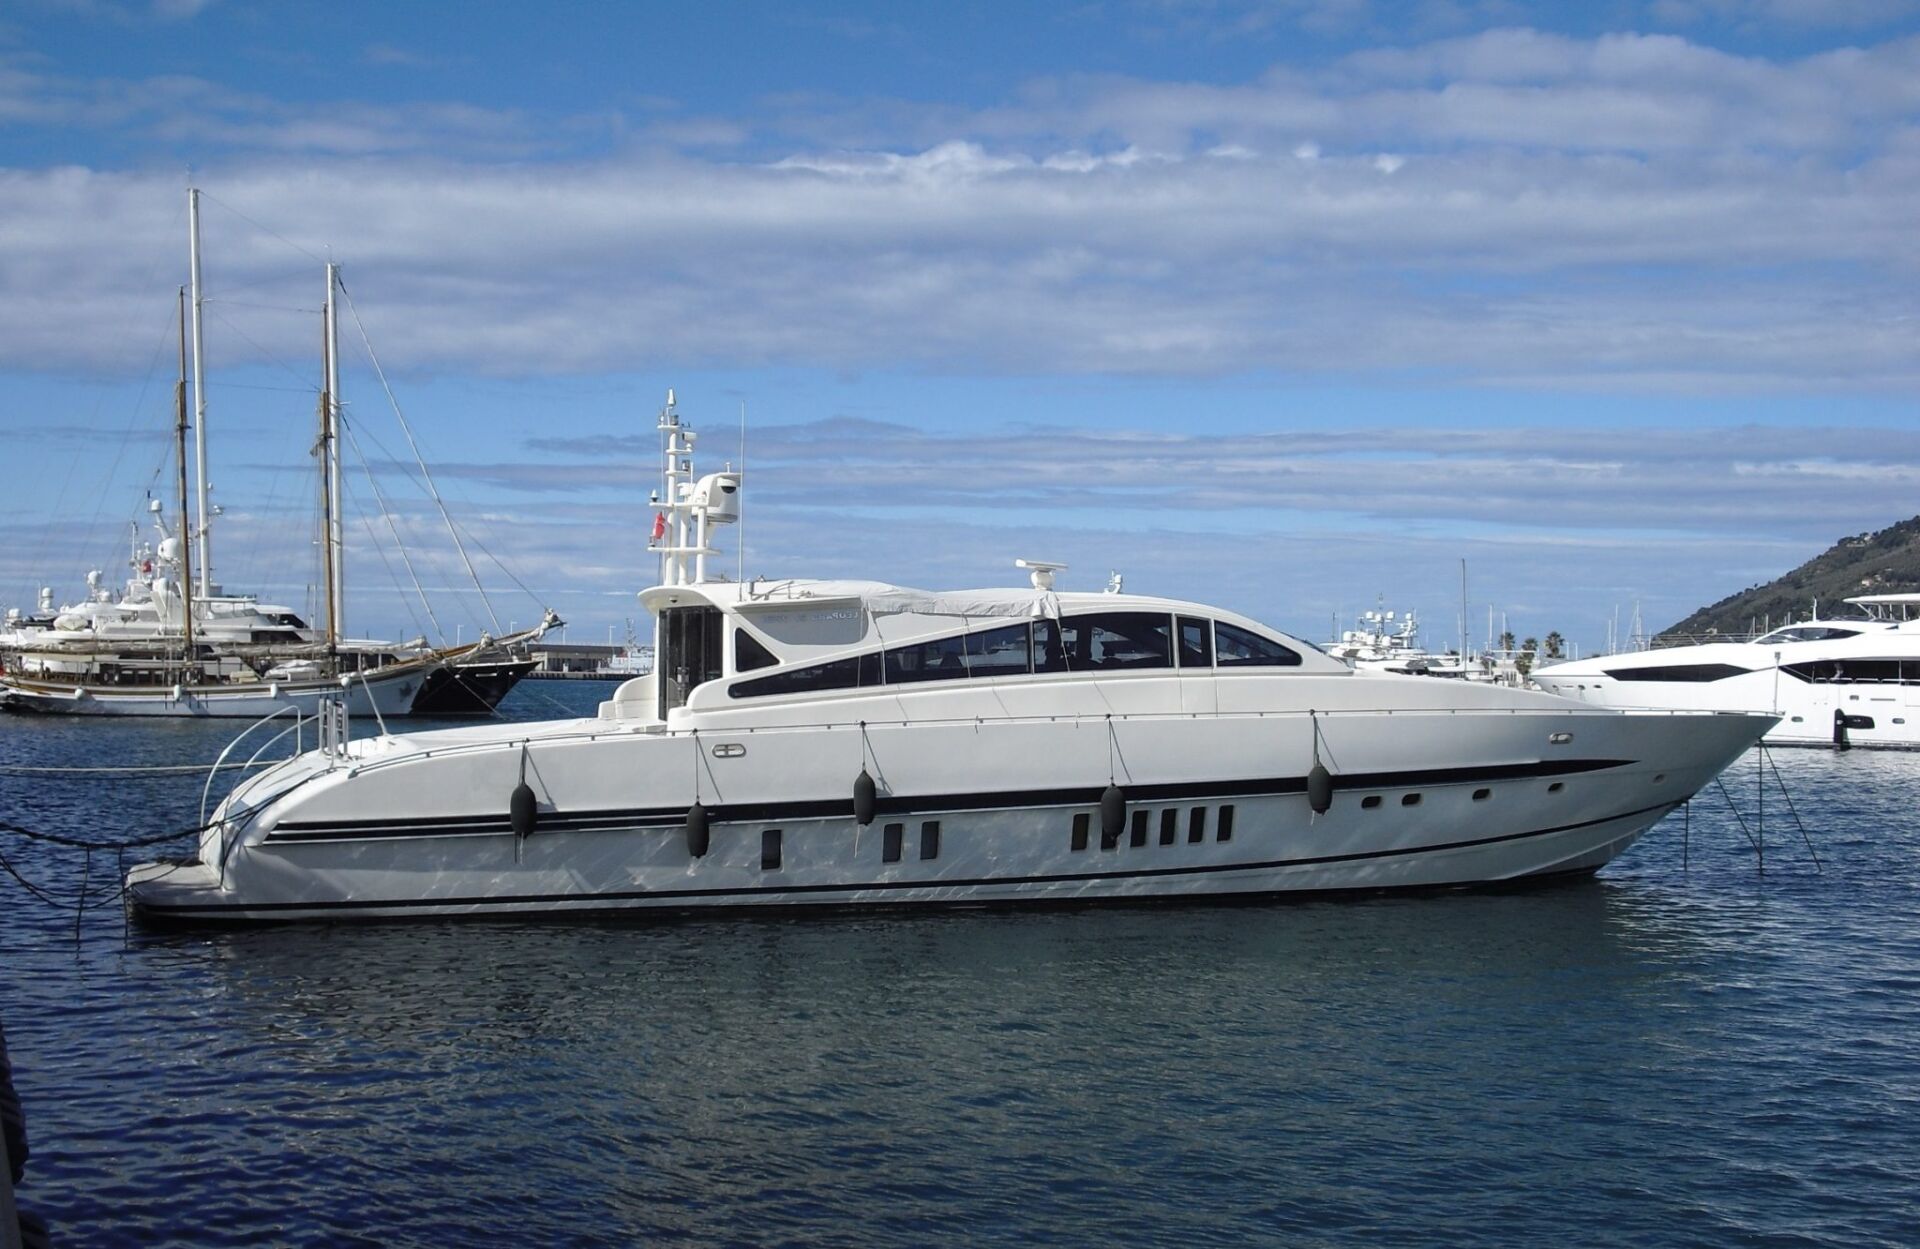 YACHTZOO is pleased to announce its appointment as central agent for the sale of M/Y ROMAS 3